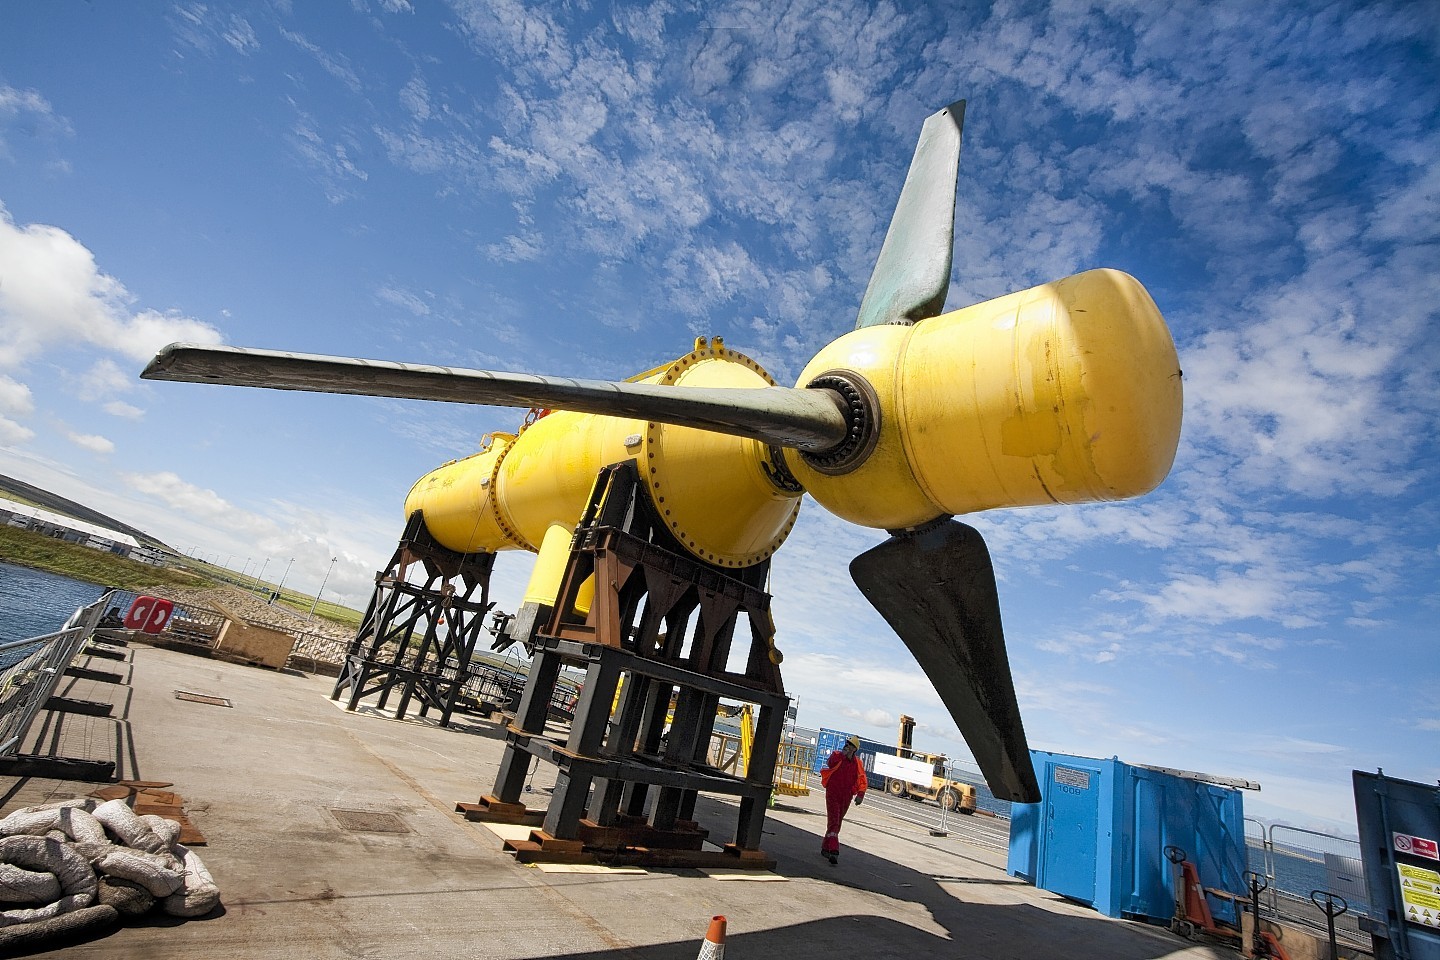 An Alstom tidal-energy device being prepared for testing at Hatston Pier in Kirkwall, Orkney